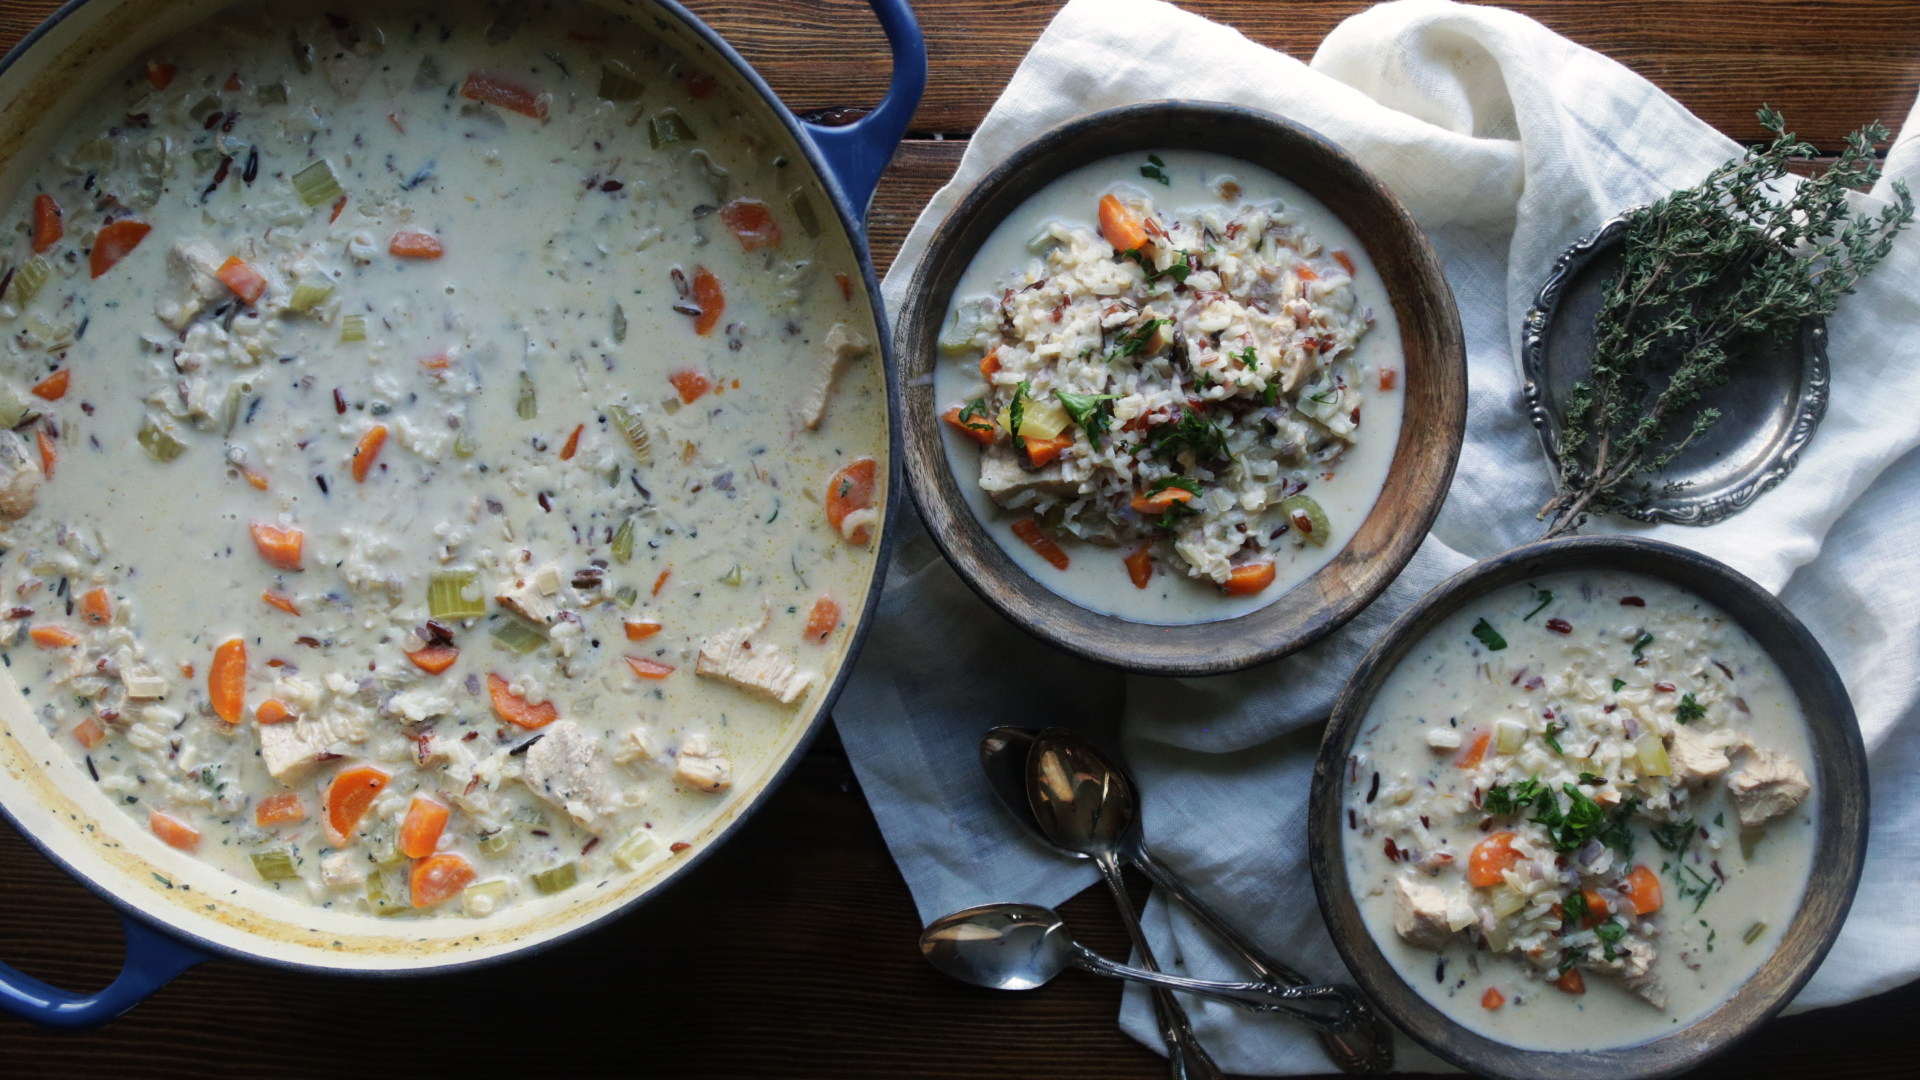 Cream of Chicken and Wild Rice Soup